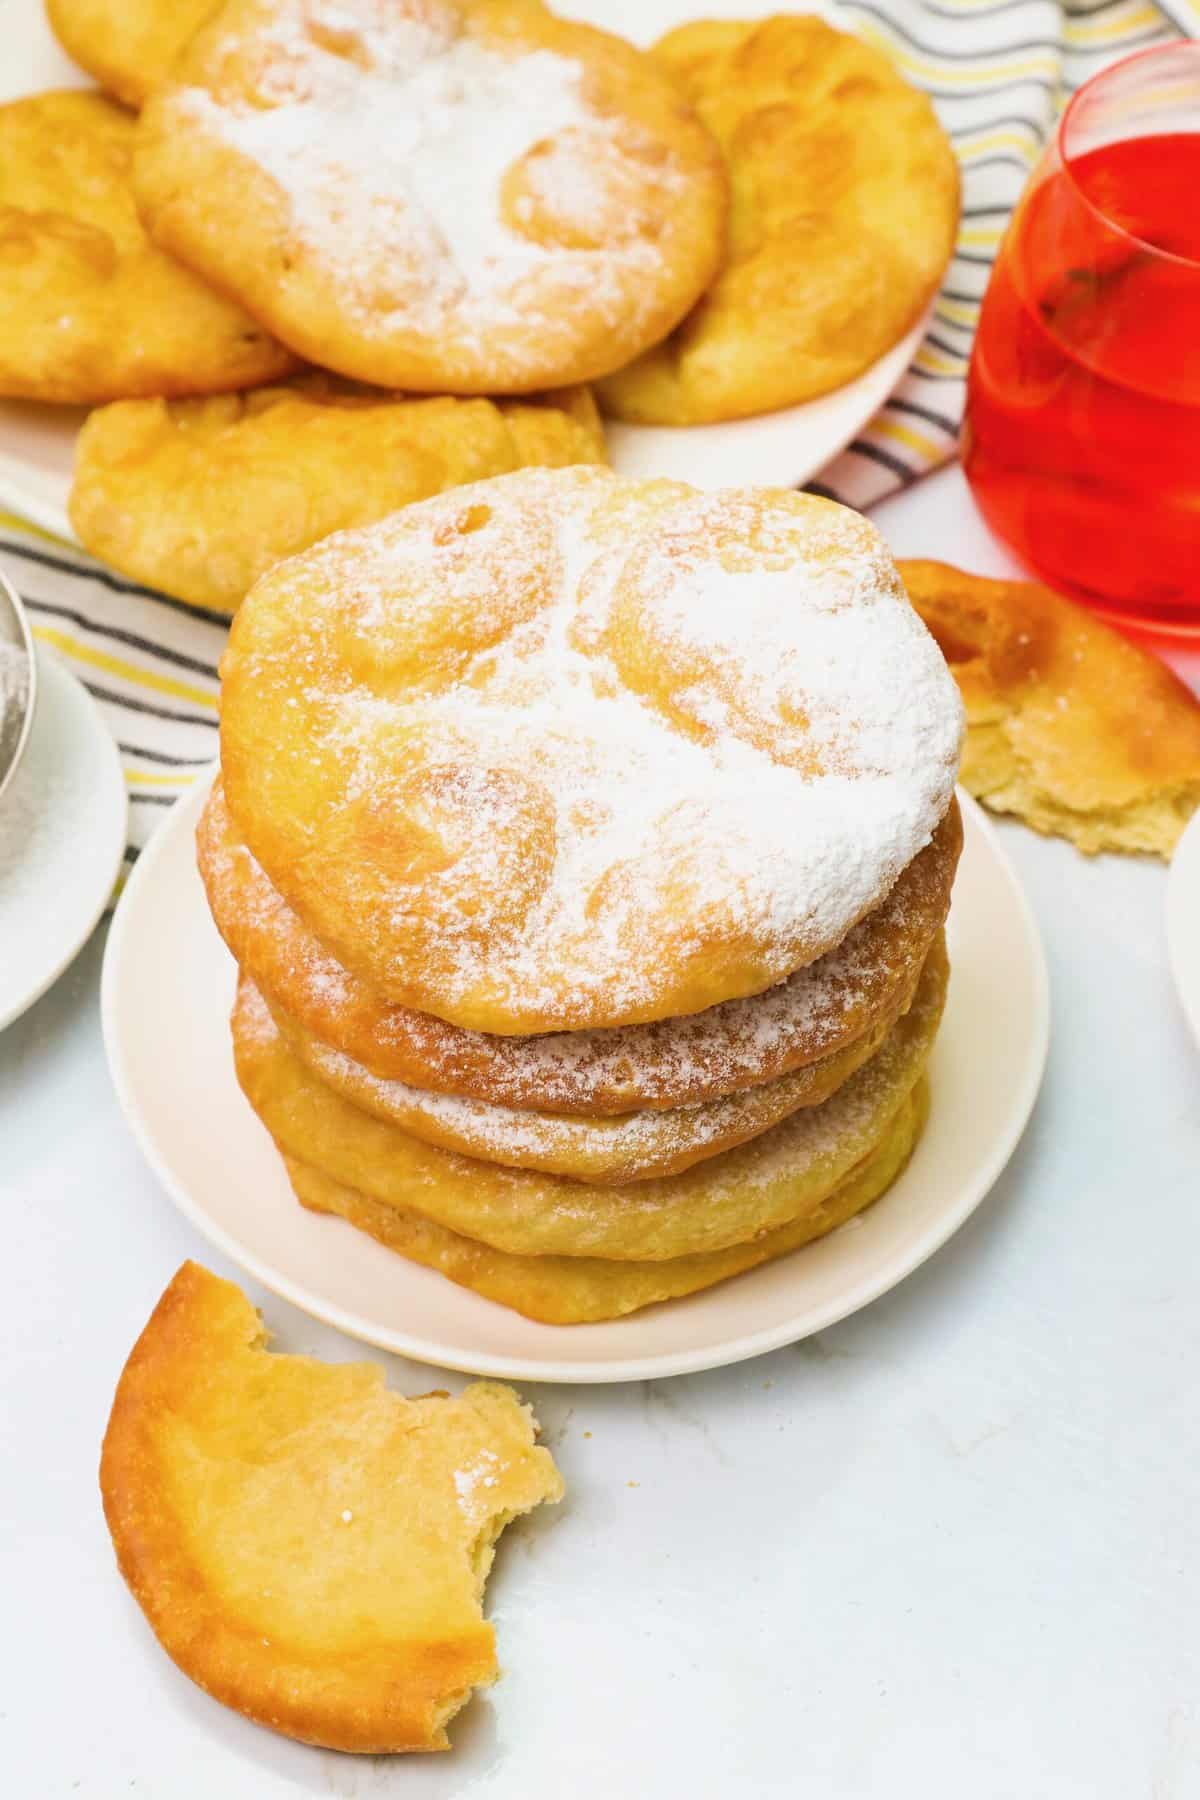 Insanely Pleasant Stacks of Fried Dough